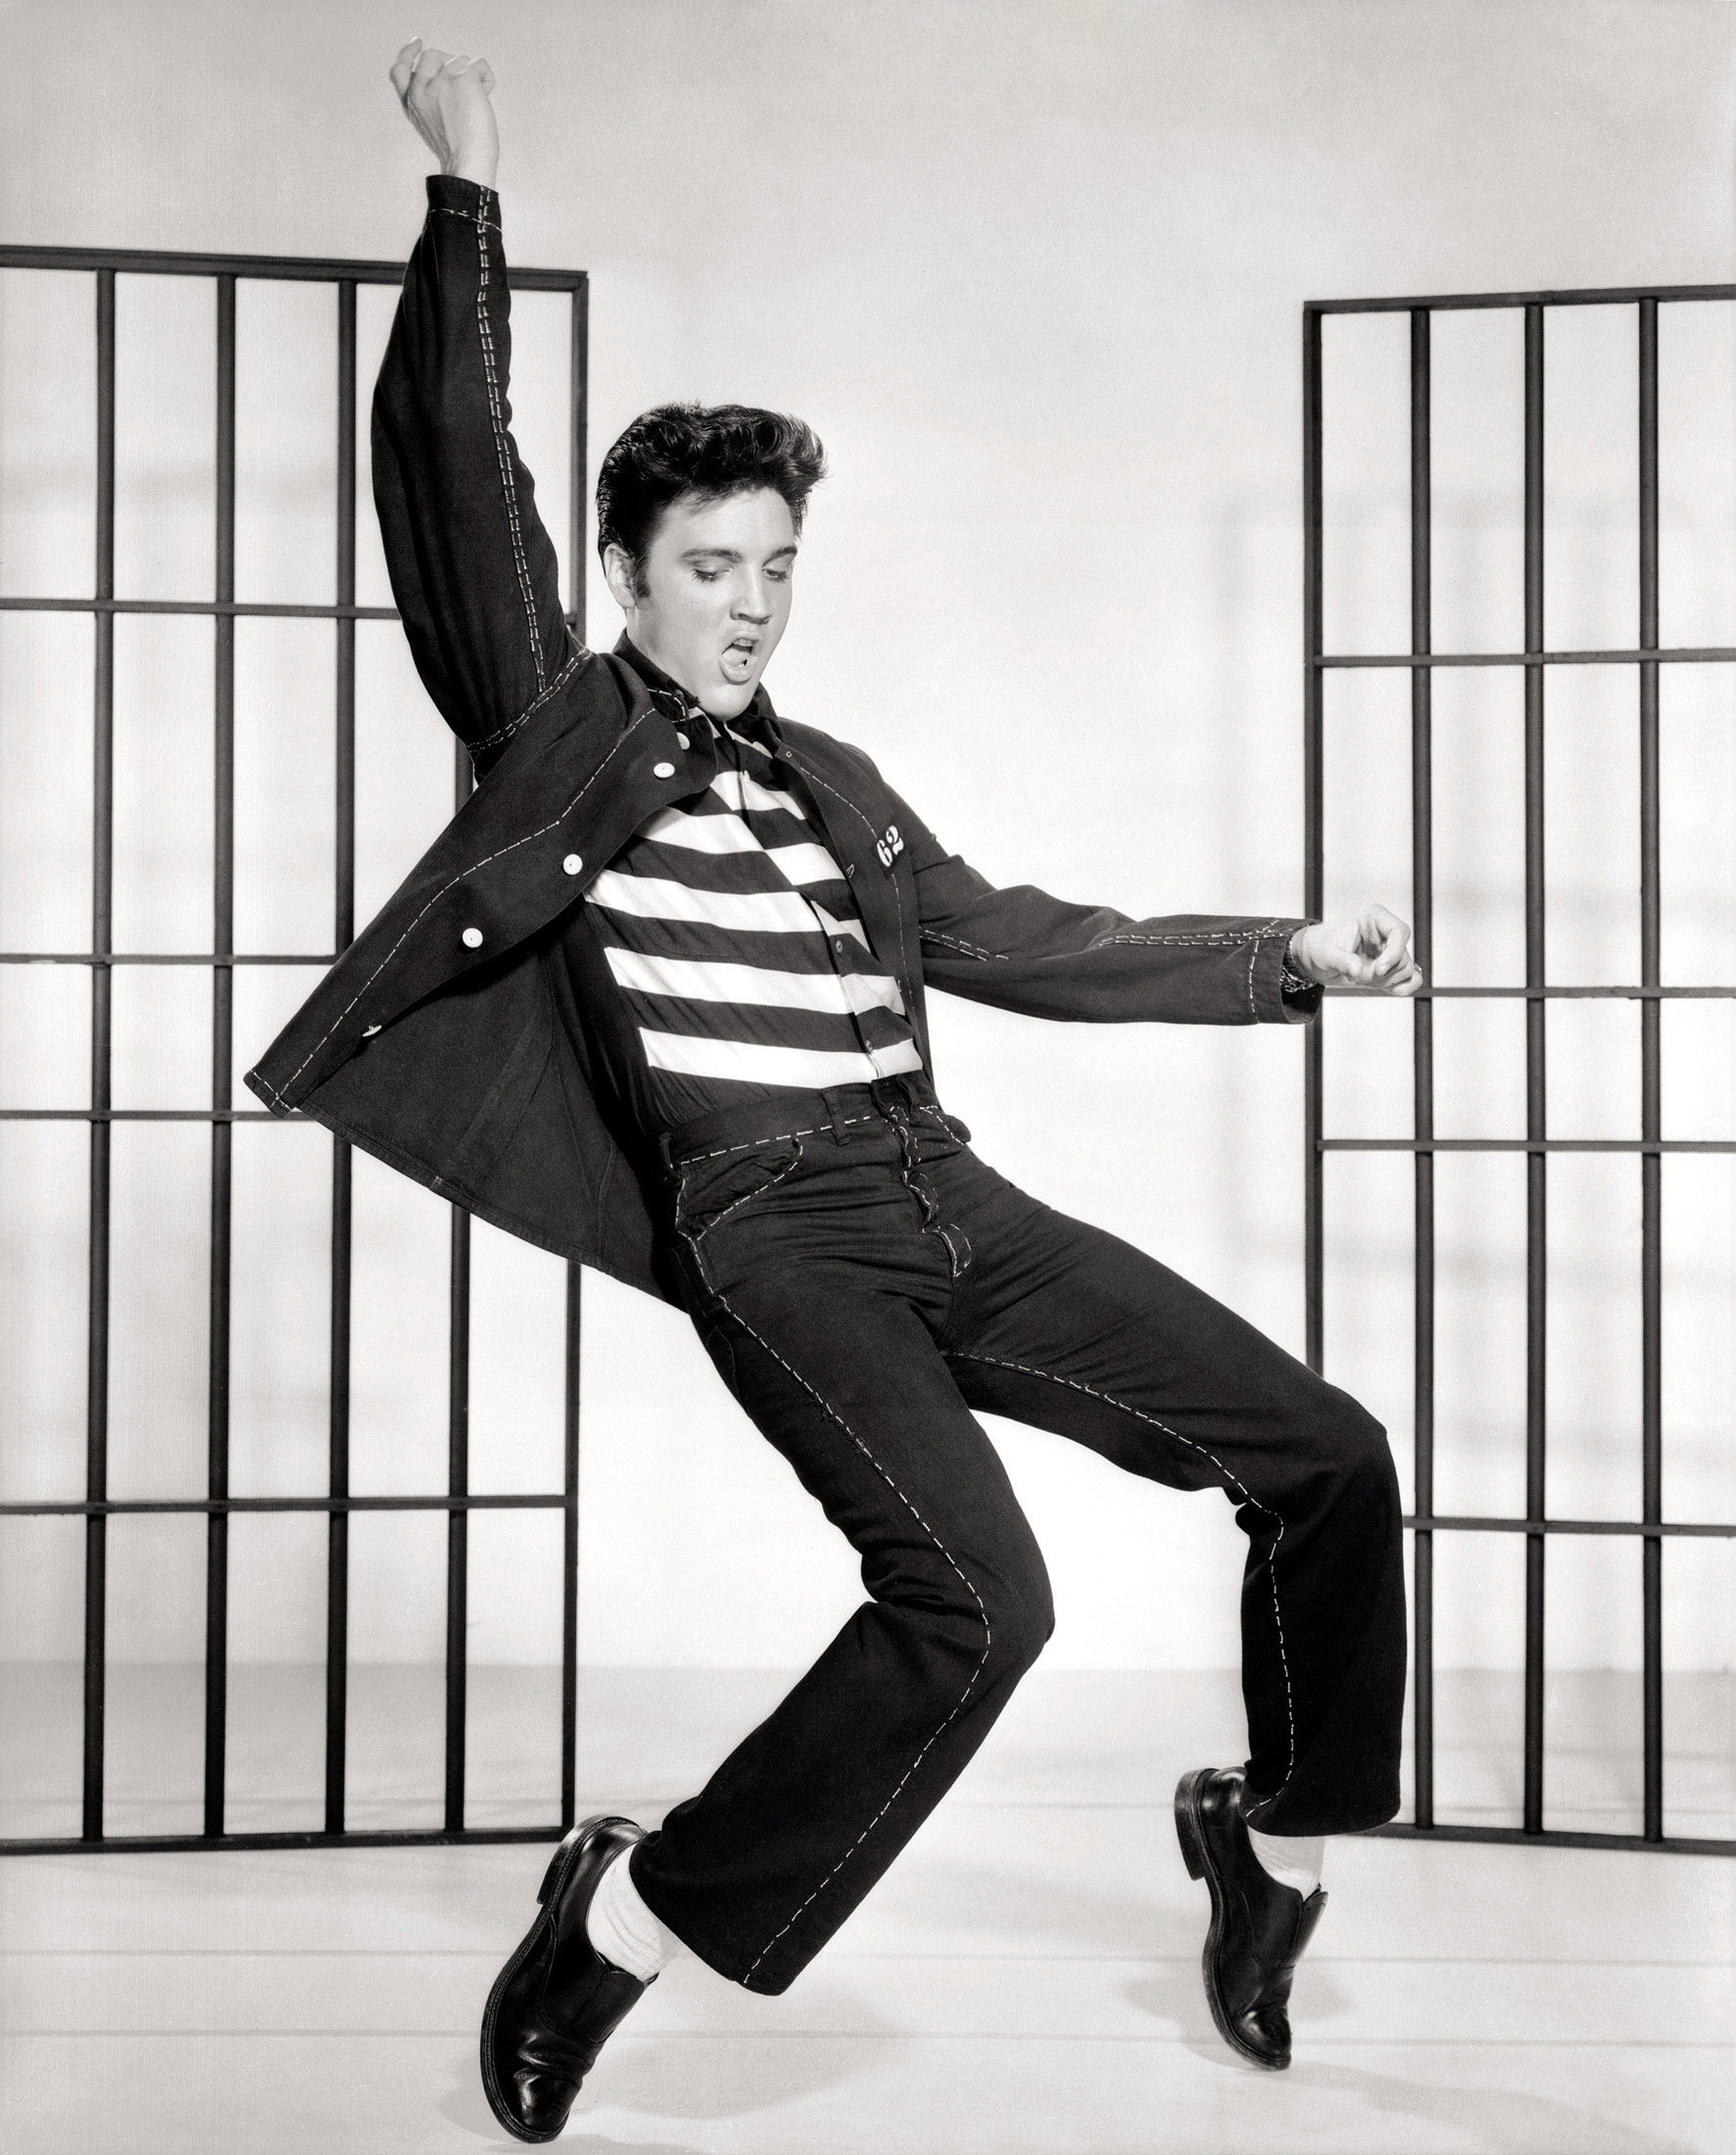 Rock and Roll Dance: One Of The Most Significant Cultural Figures Of The 20th Century, The King, "Jailhouse Rock" Movie Of 1957, Elvis Presley. 1780x2200 HD Wallpaper.